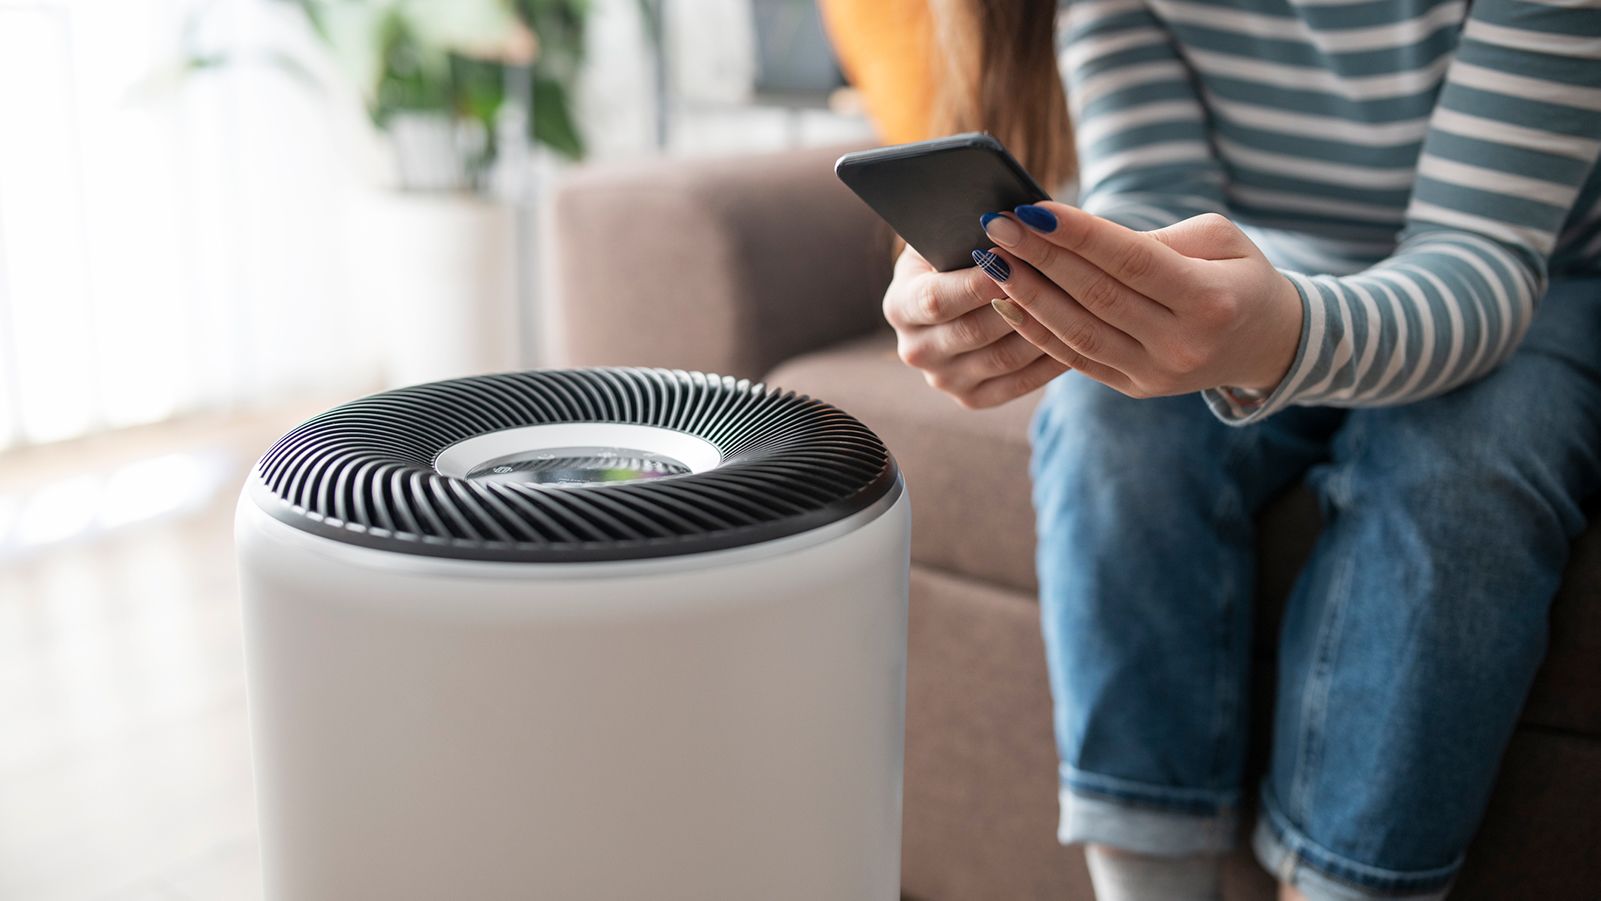 Xiaomi Smart Air Purifier 4 series has a 3-in-1 filtration system to trap  air pollutants » Gadget Flow